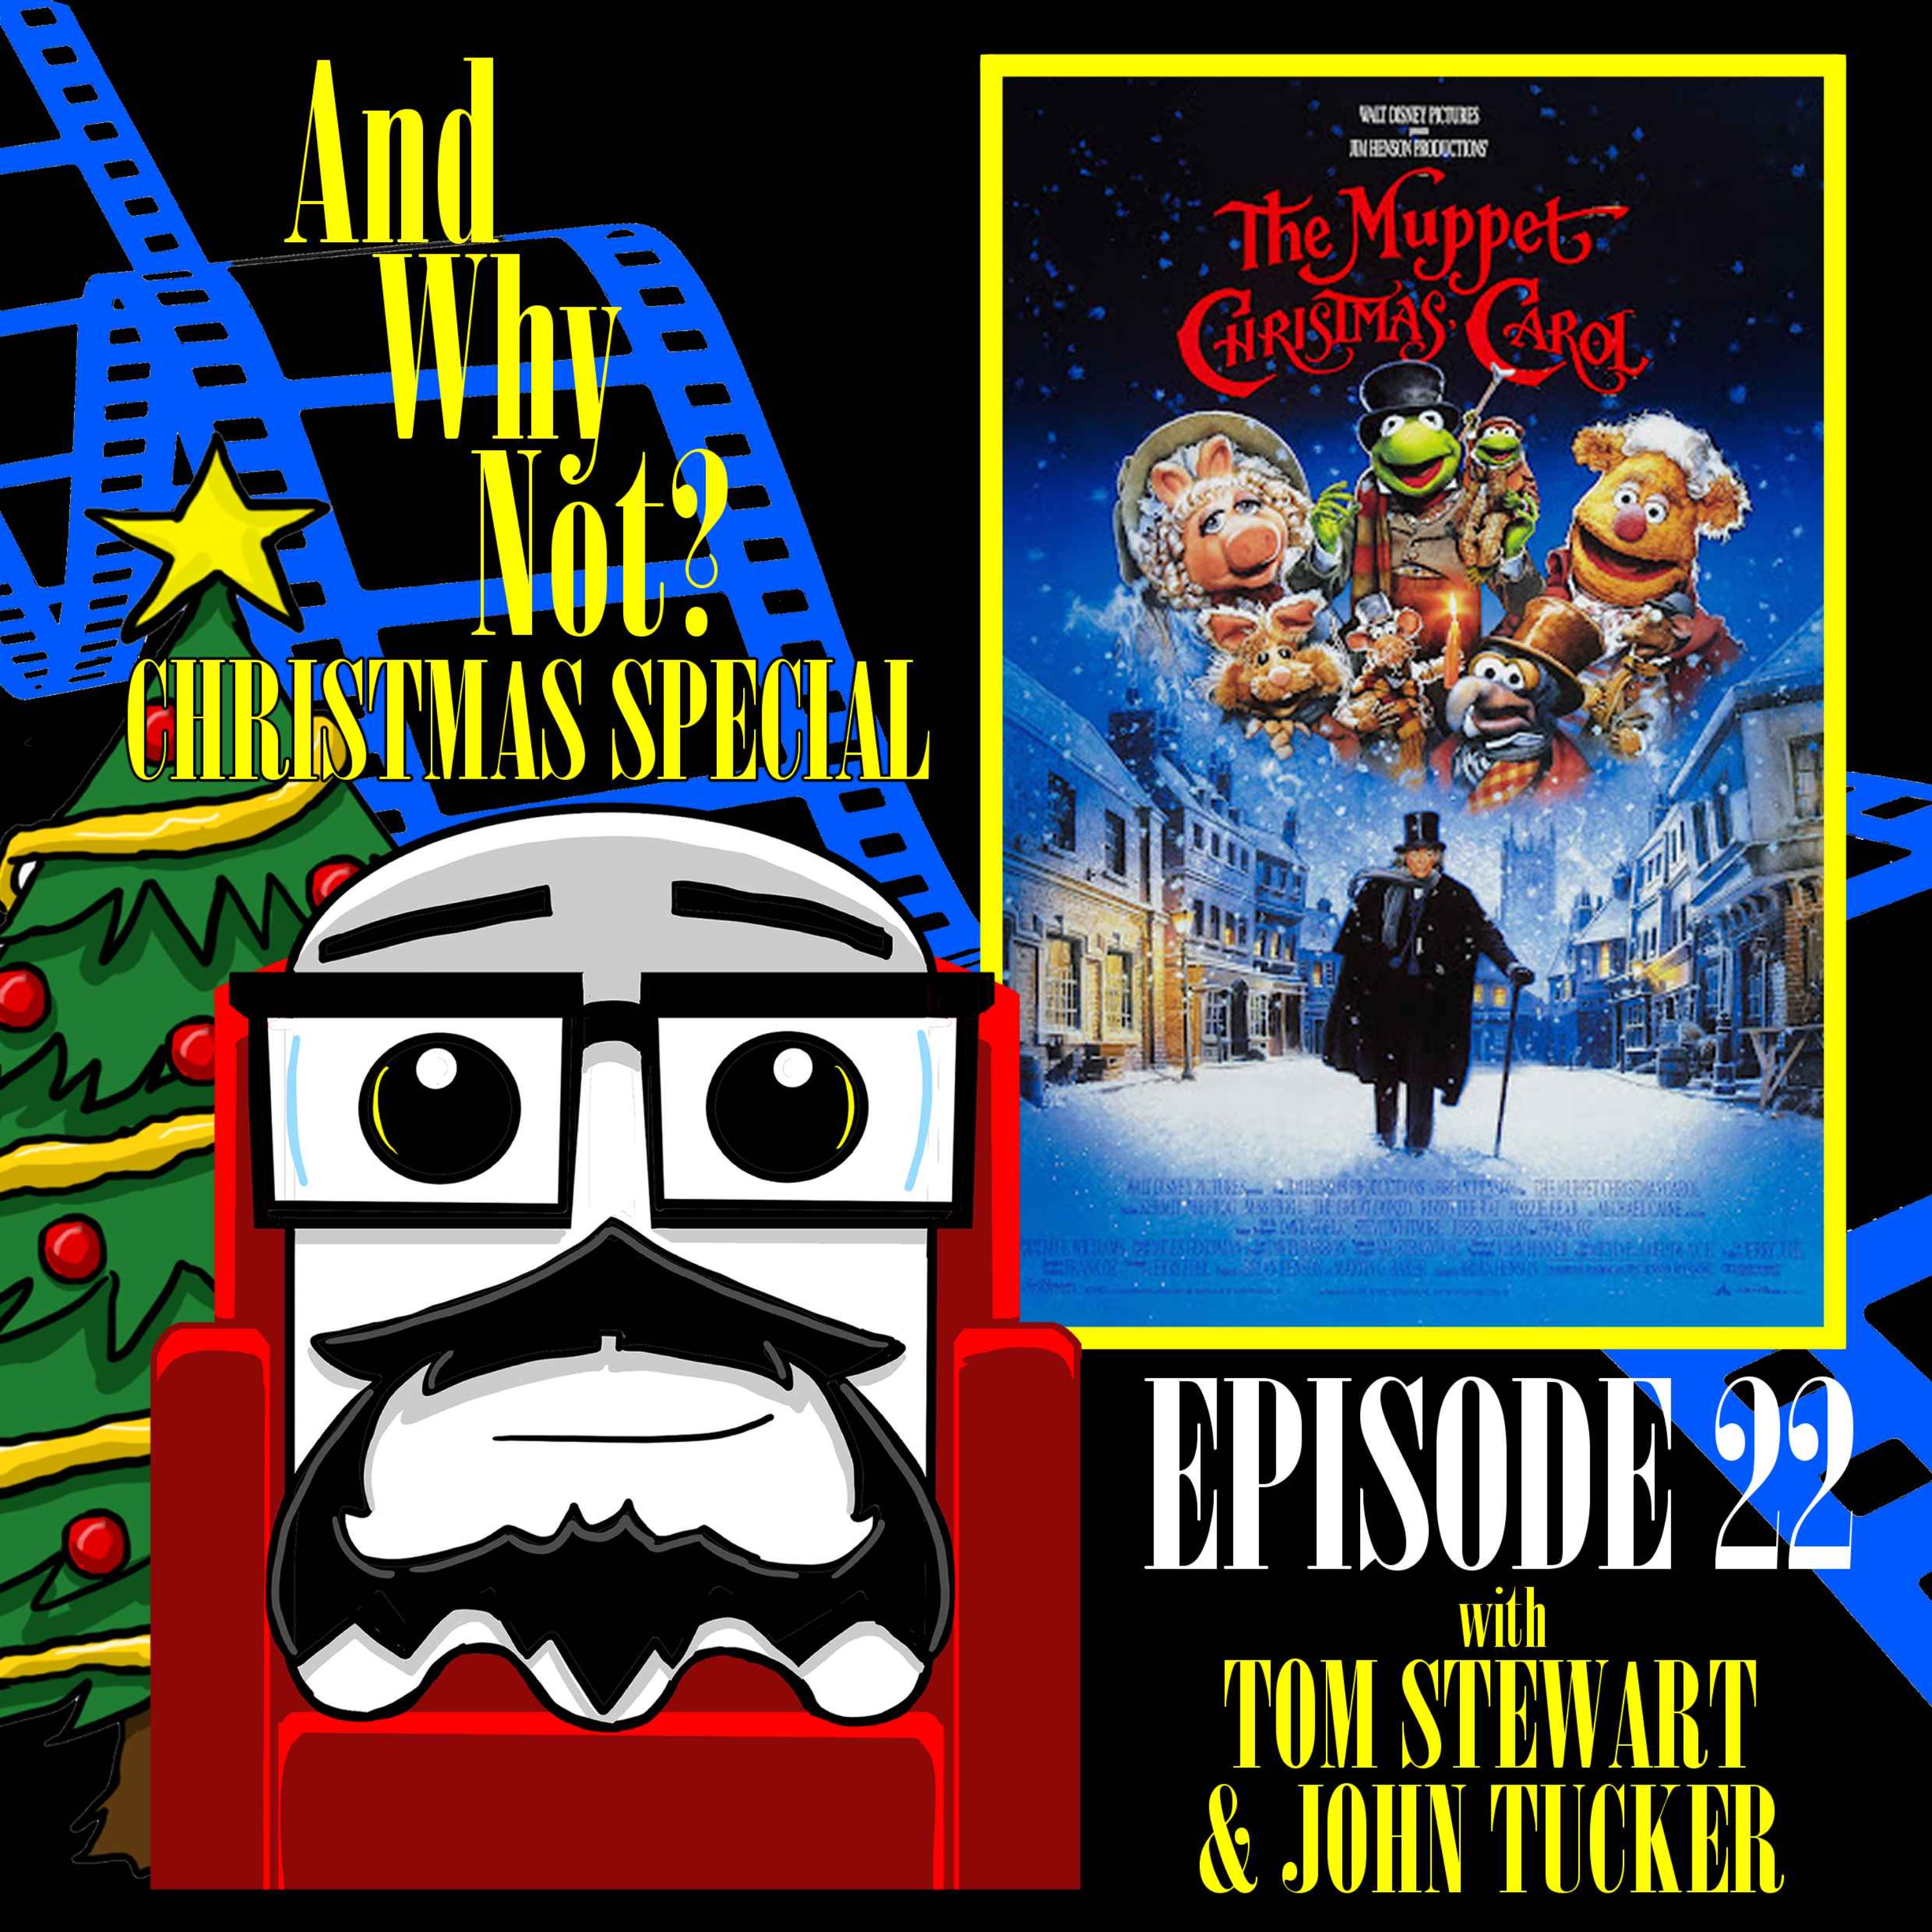 The Muppet Christmas Carol - Christmas Special #1